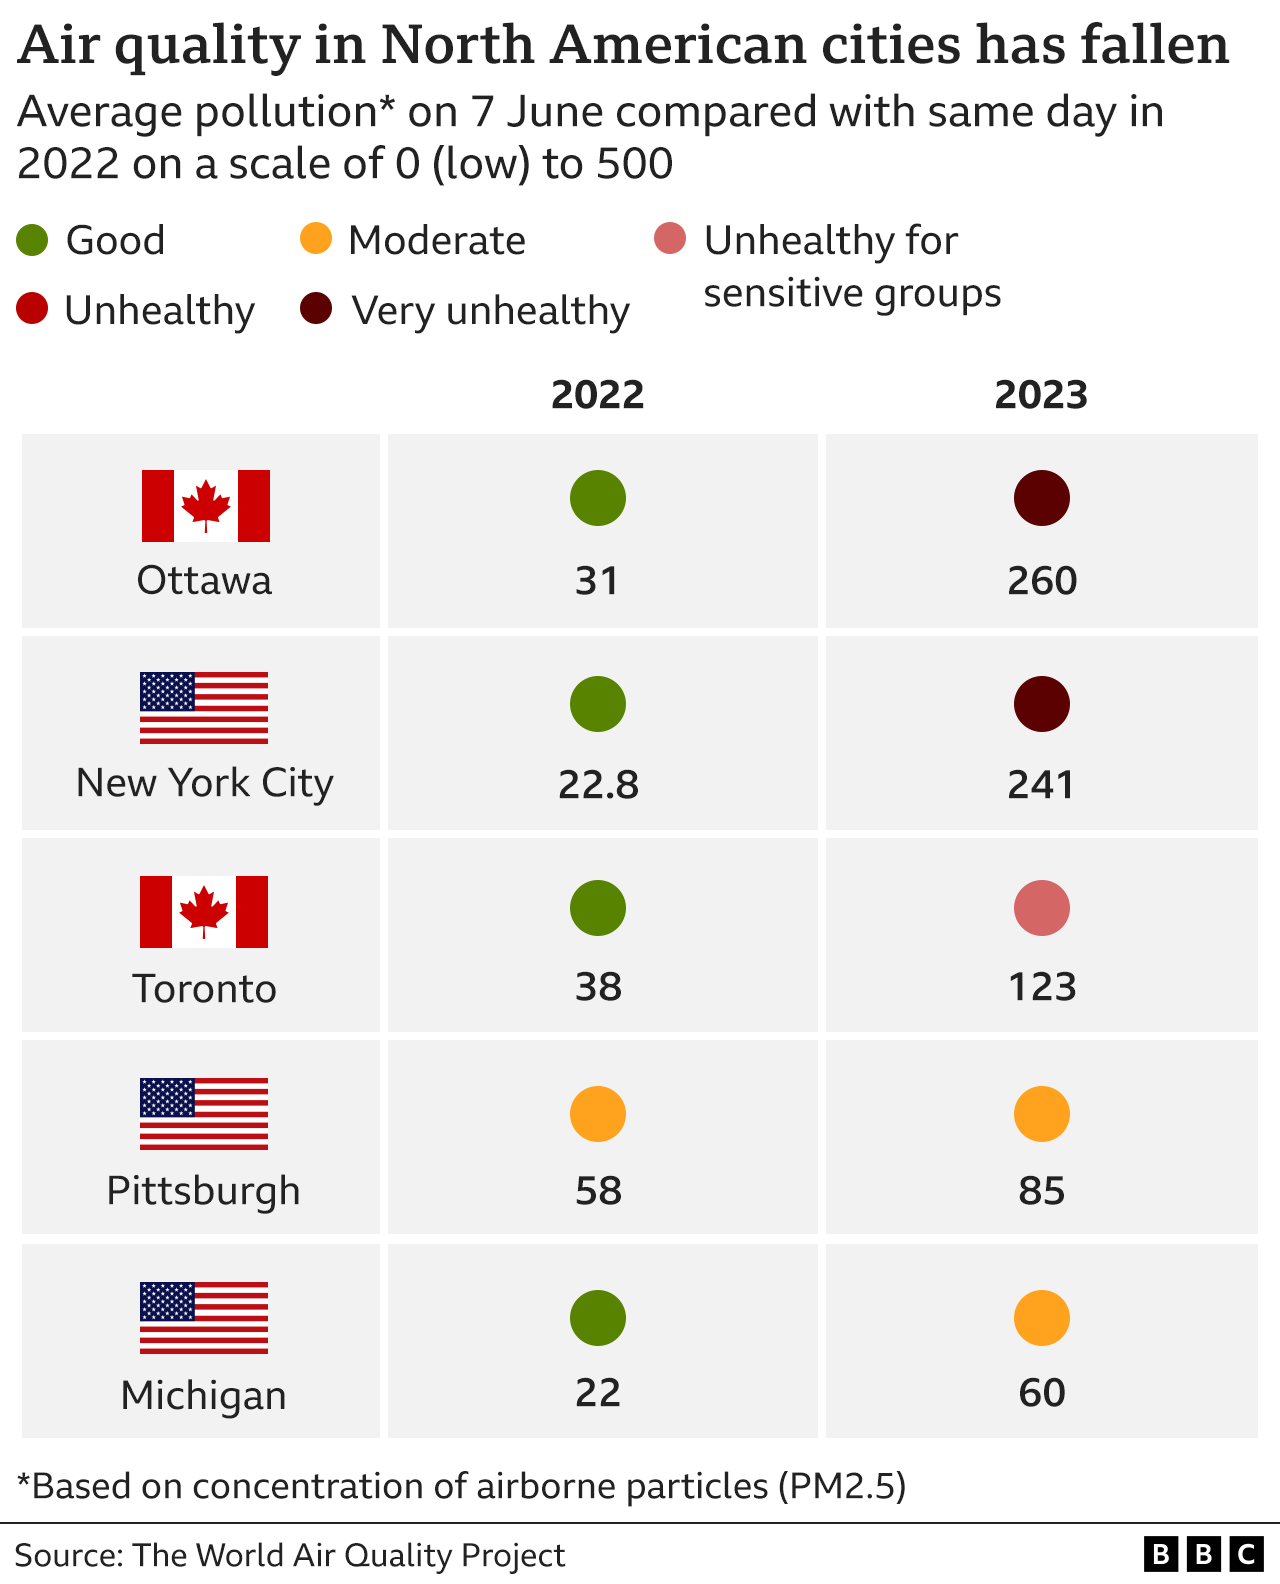 Table showing how average air quality had got worse in five North American cities on 7 June 2023 compared with the same day in 2022, with Ottawa and New York going from good to very unhealthy, Toronto being unhealthy for sensitive groups from good, Pittsburgh remained moderate, while Michigan went from good to moderate